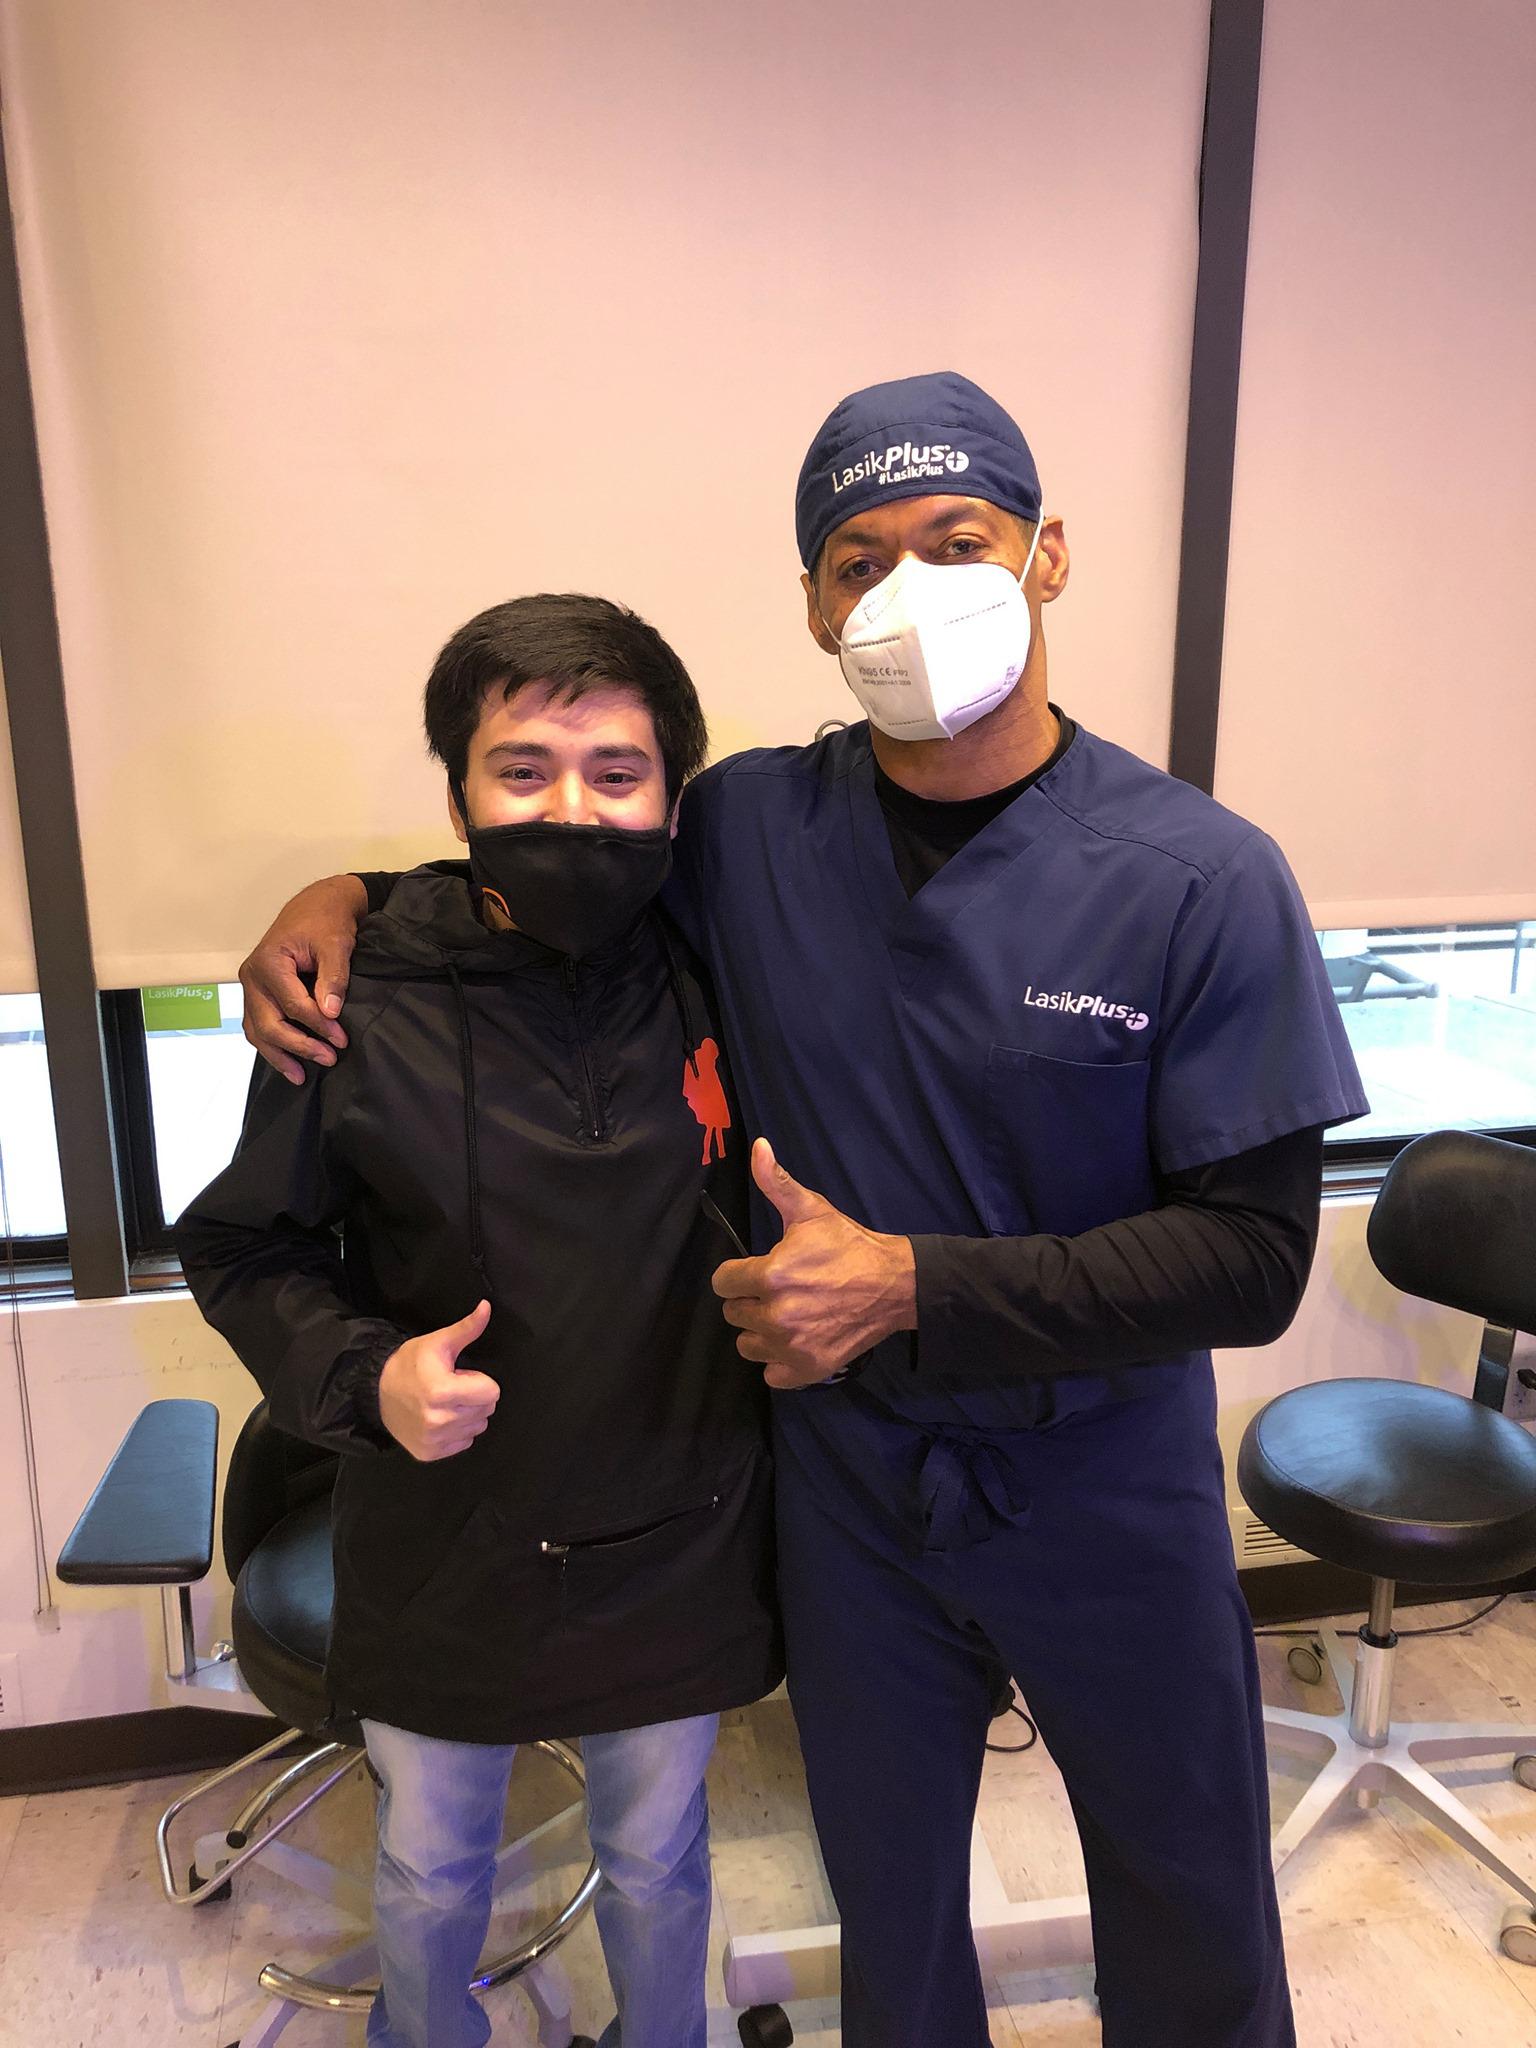 Dr. January and his wonderful patient!